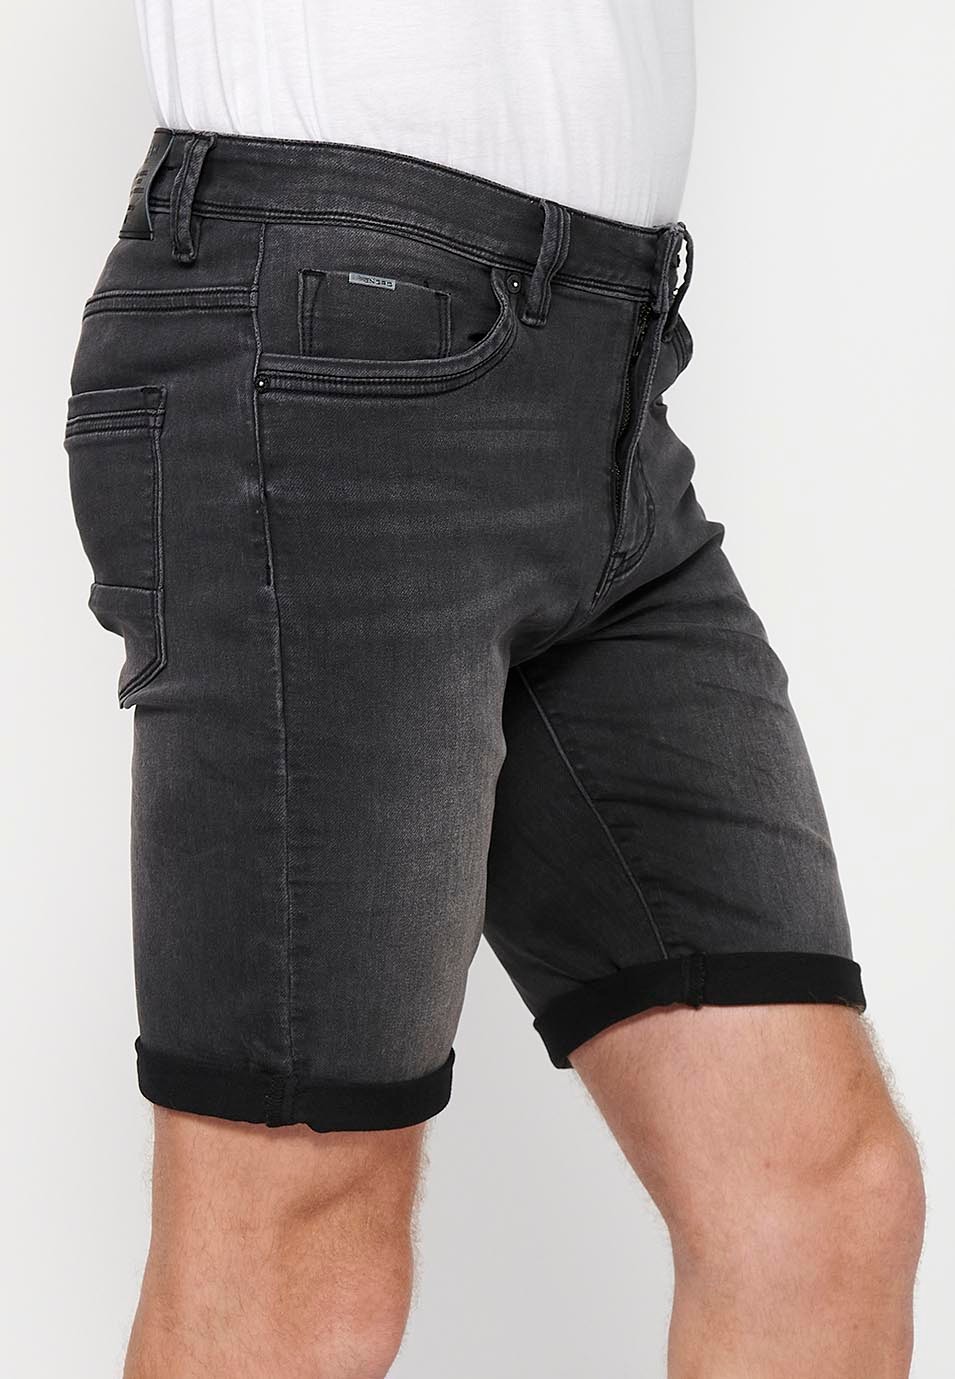 Shorts with turn-up finish with front closure with zipper and button in Black for Men 1